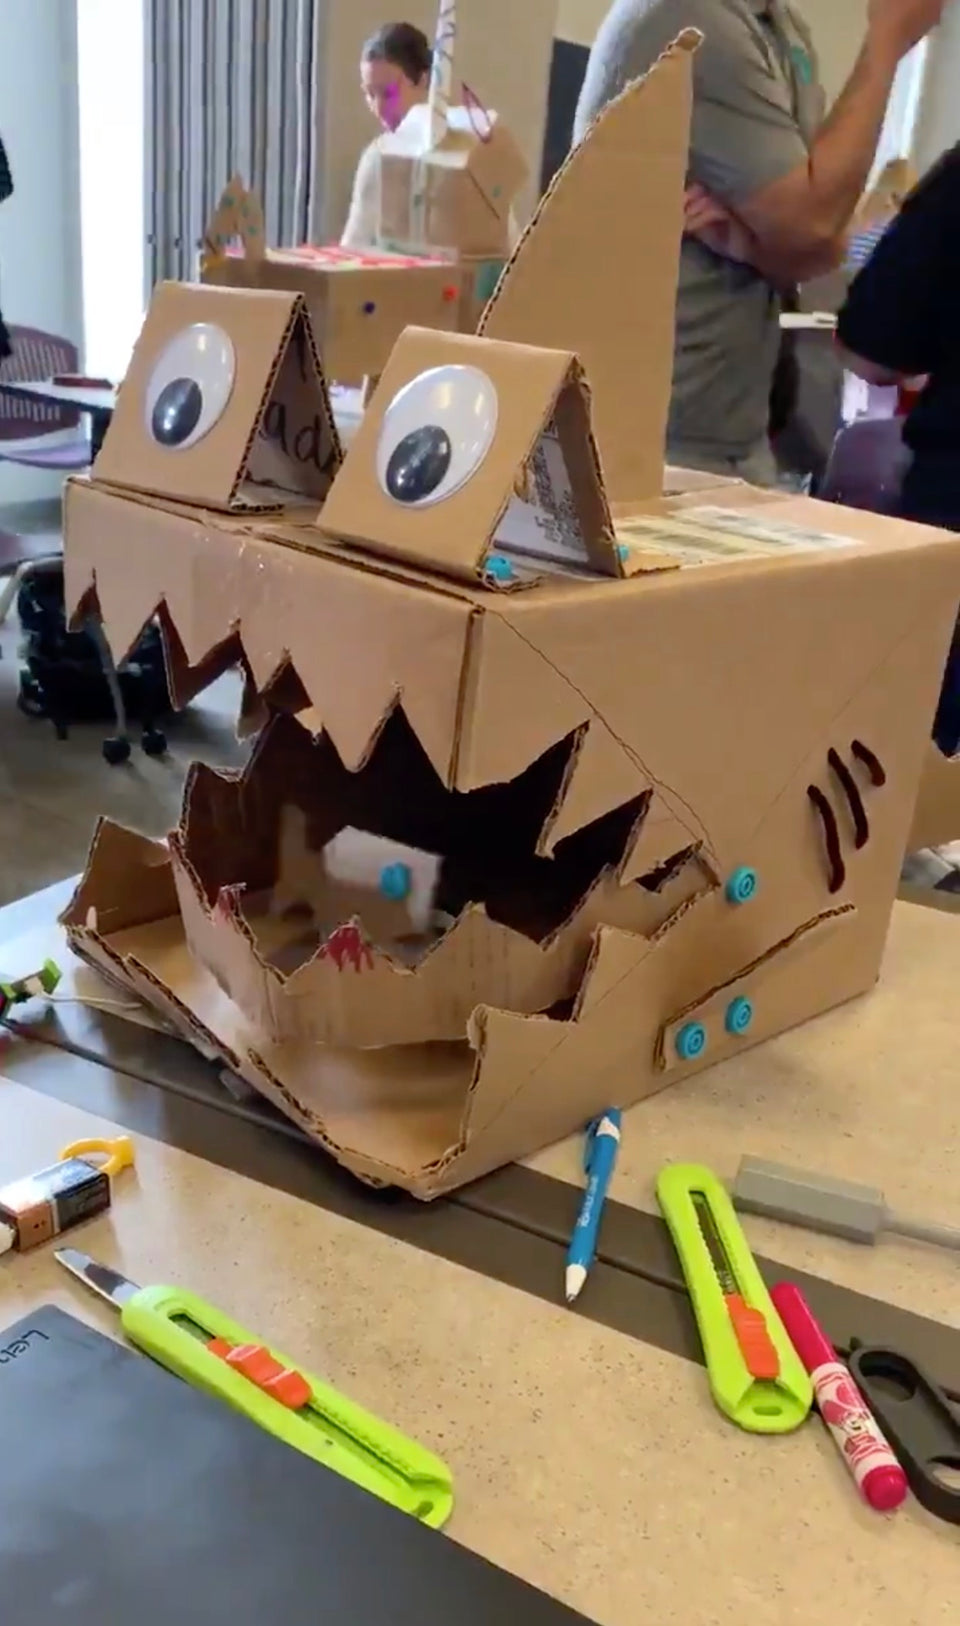 Makedo cardboard shark with littlebits animated fish inside its mouth.